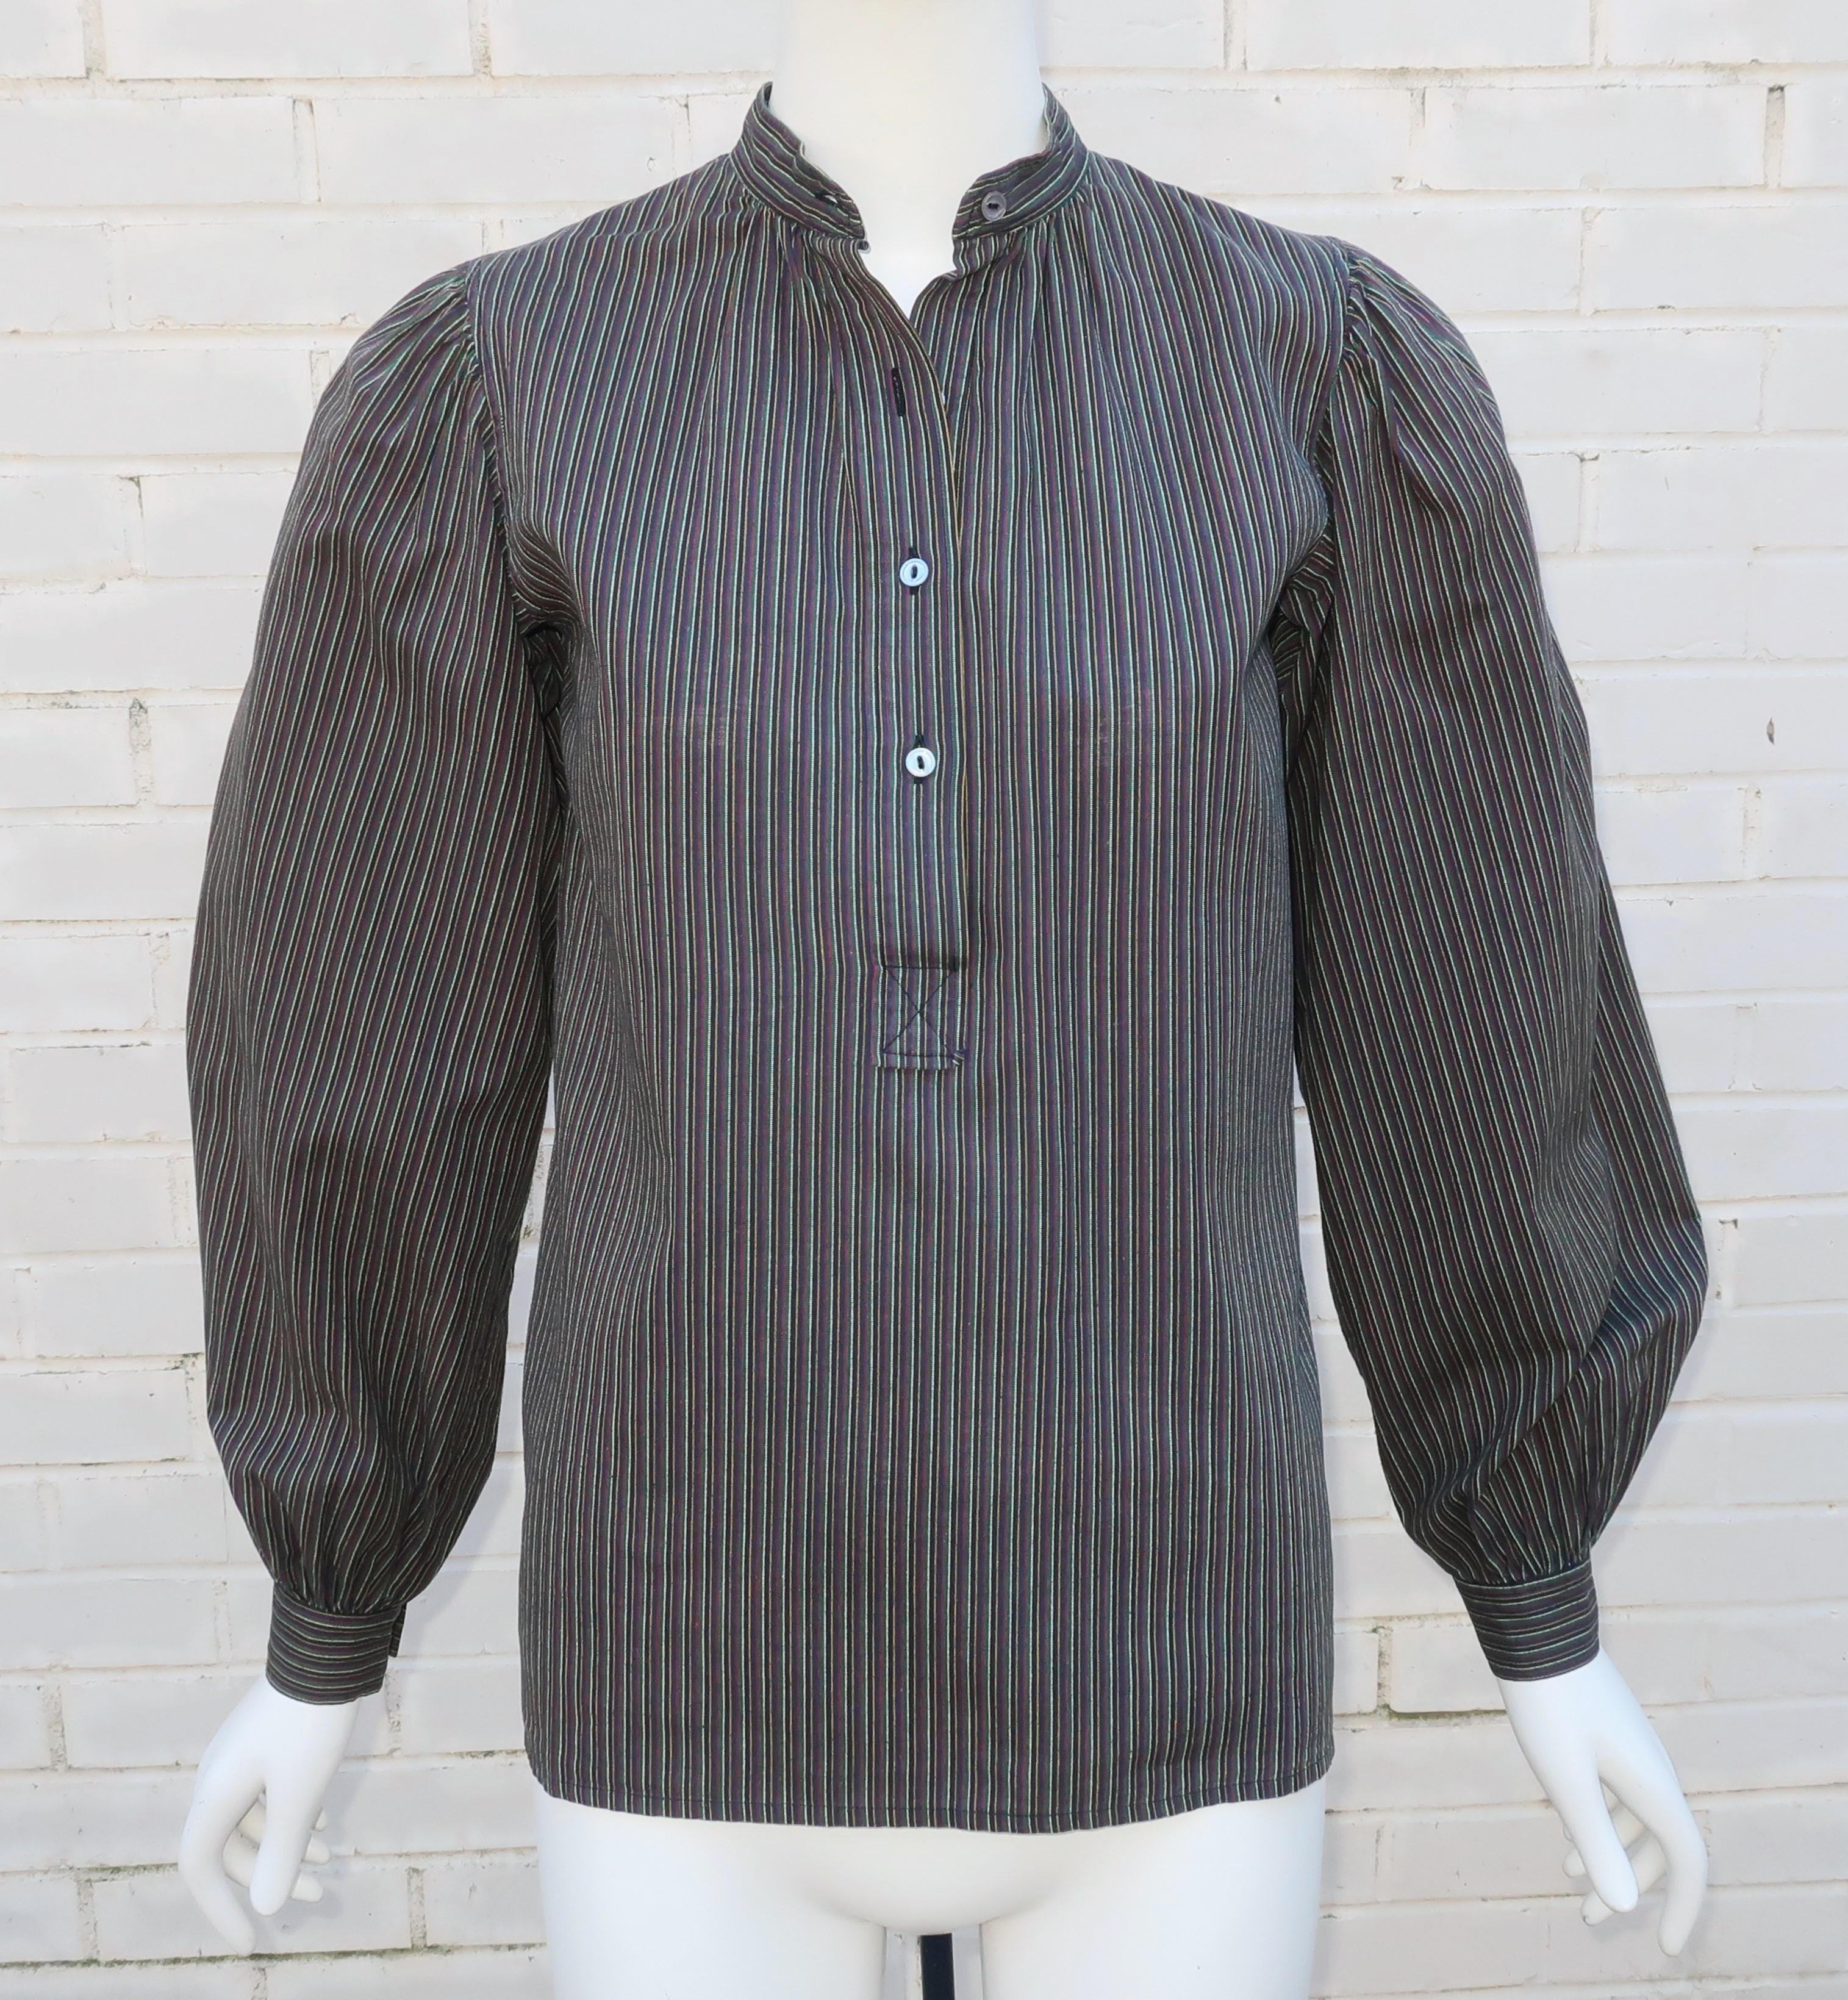 Yves Saint Laurent Striped Cotton Peasant Style Blouse, 1970's In Good Condition For Sale In Atlanta, GA